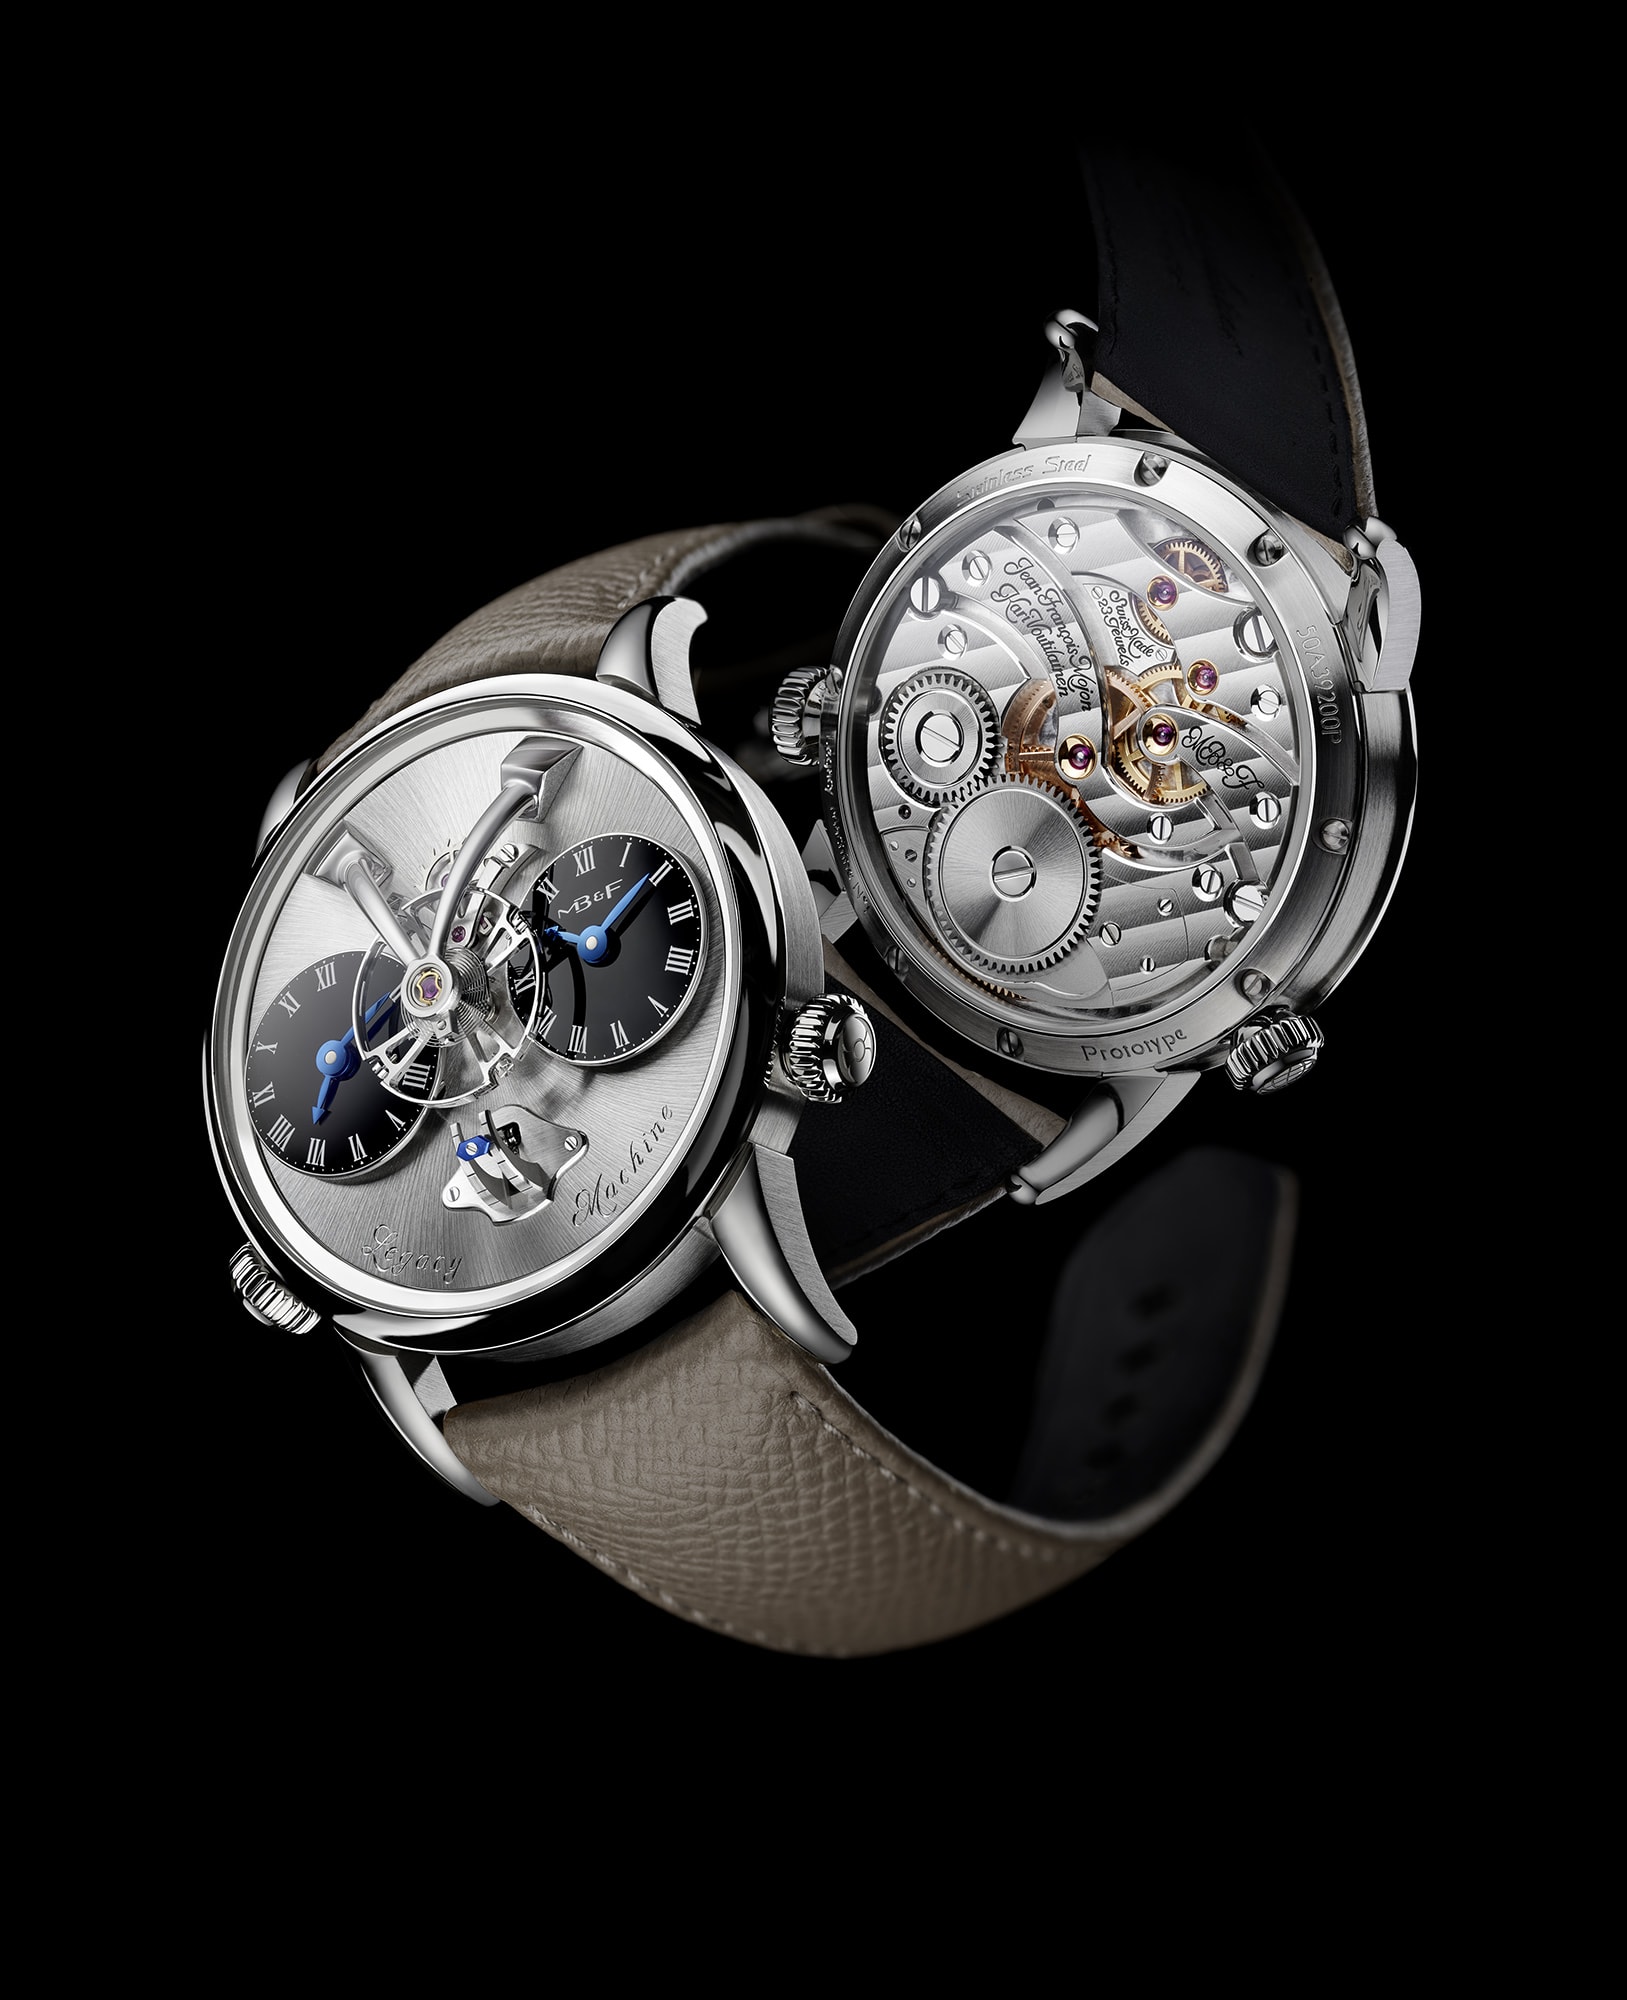 MB&F LM1 Prototype ?Longhorn? Heading To Auction For Good Cause